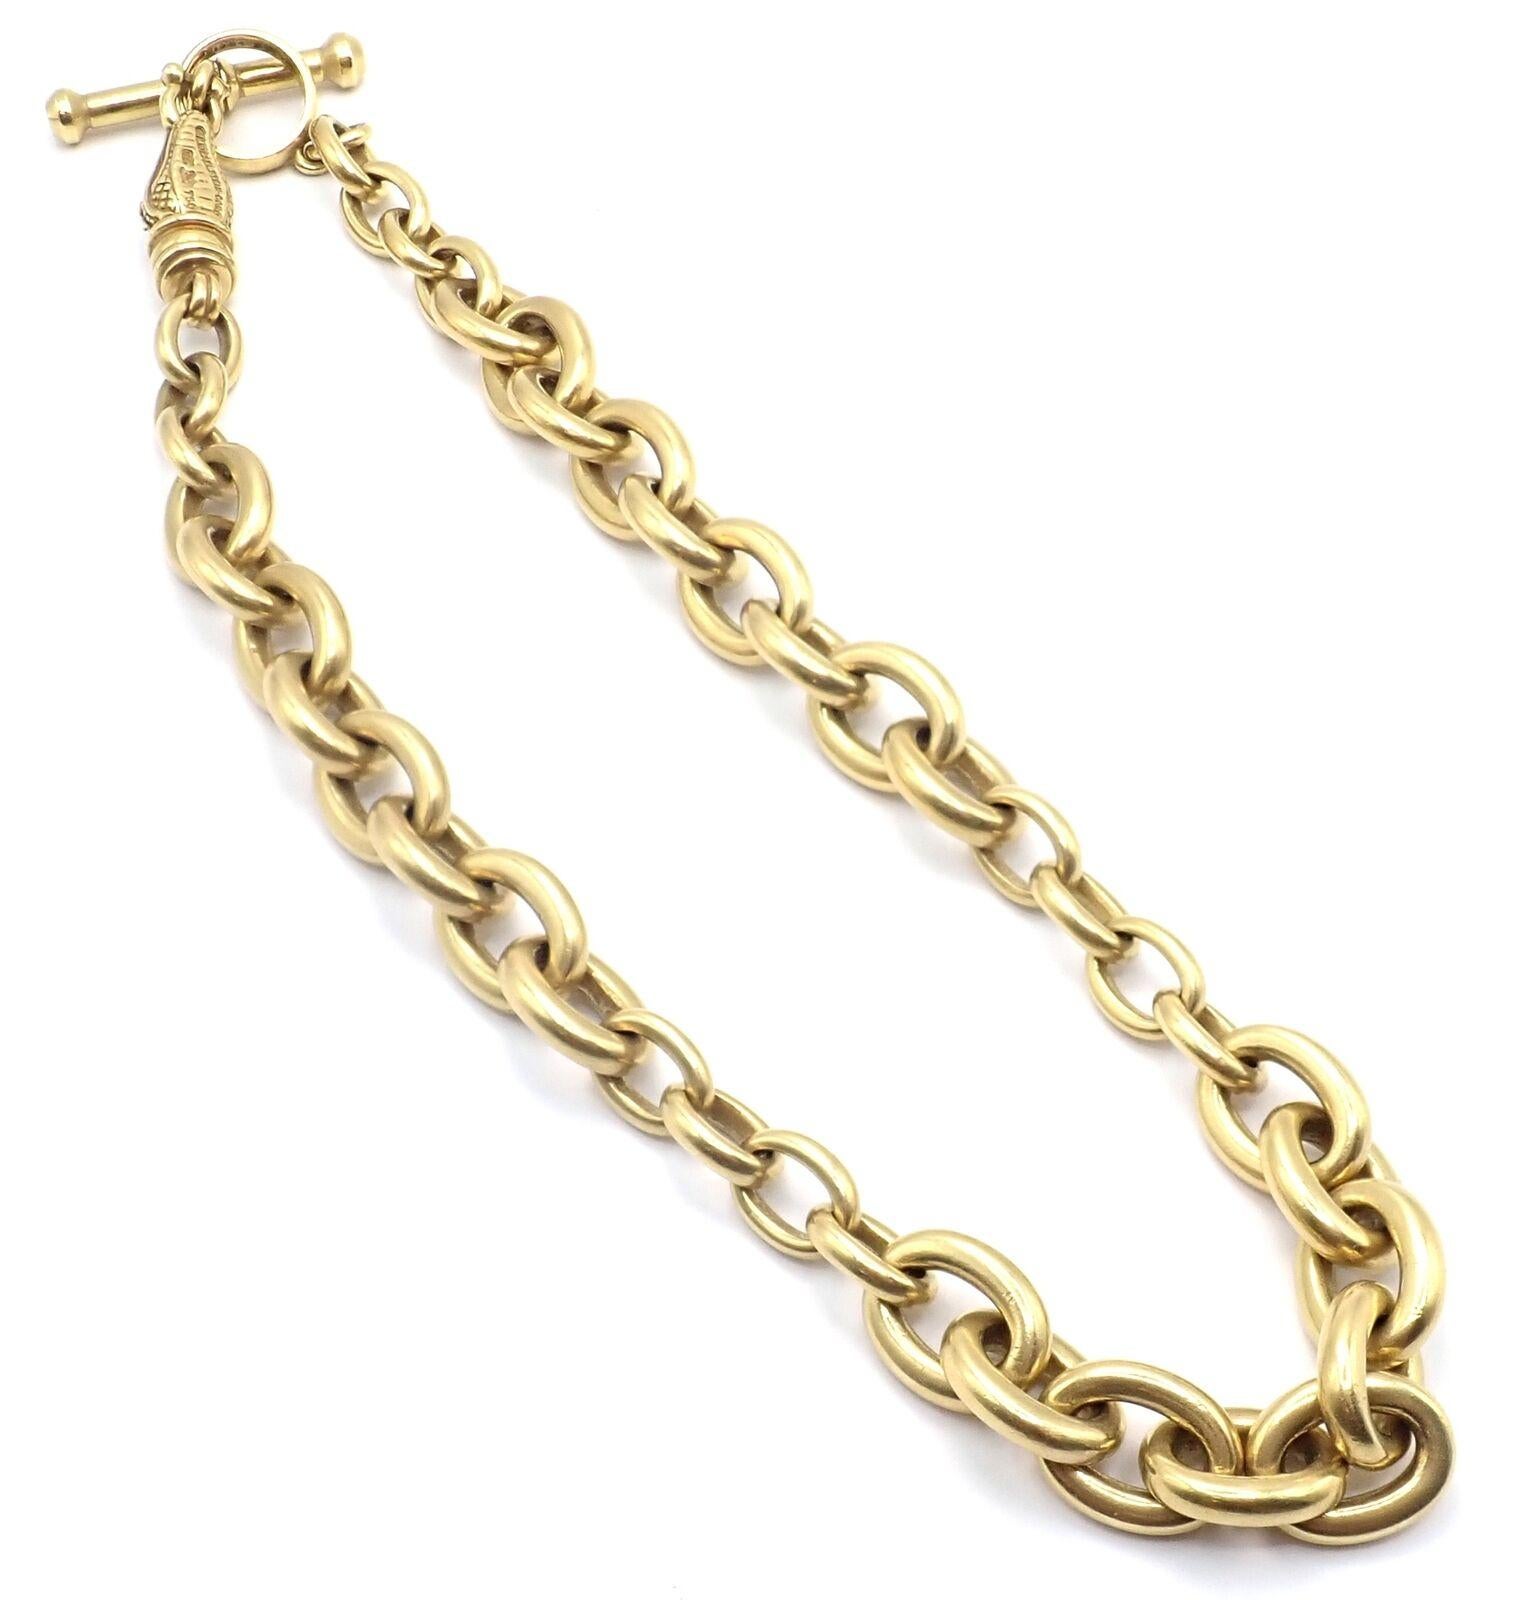 Women's or Men's Barry Kieselstein Cord Alligator Head Link Toggle Yellow Gold Necklace